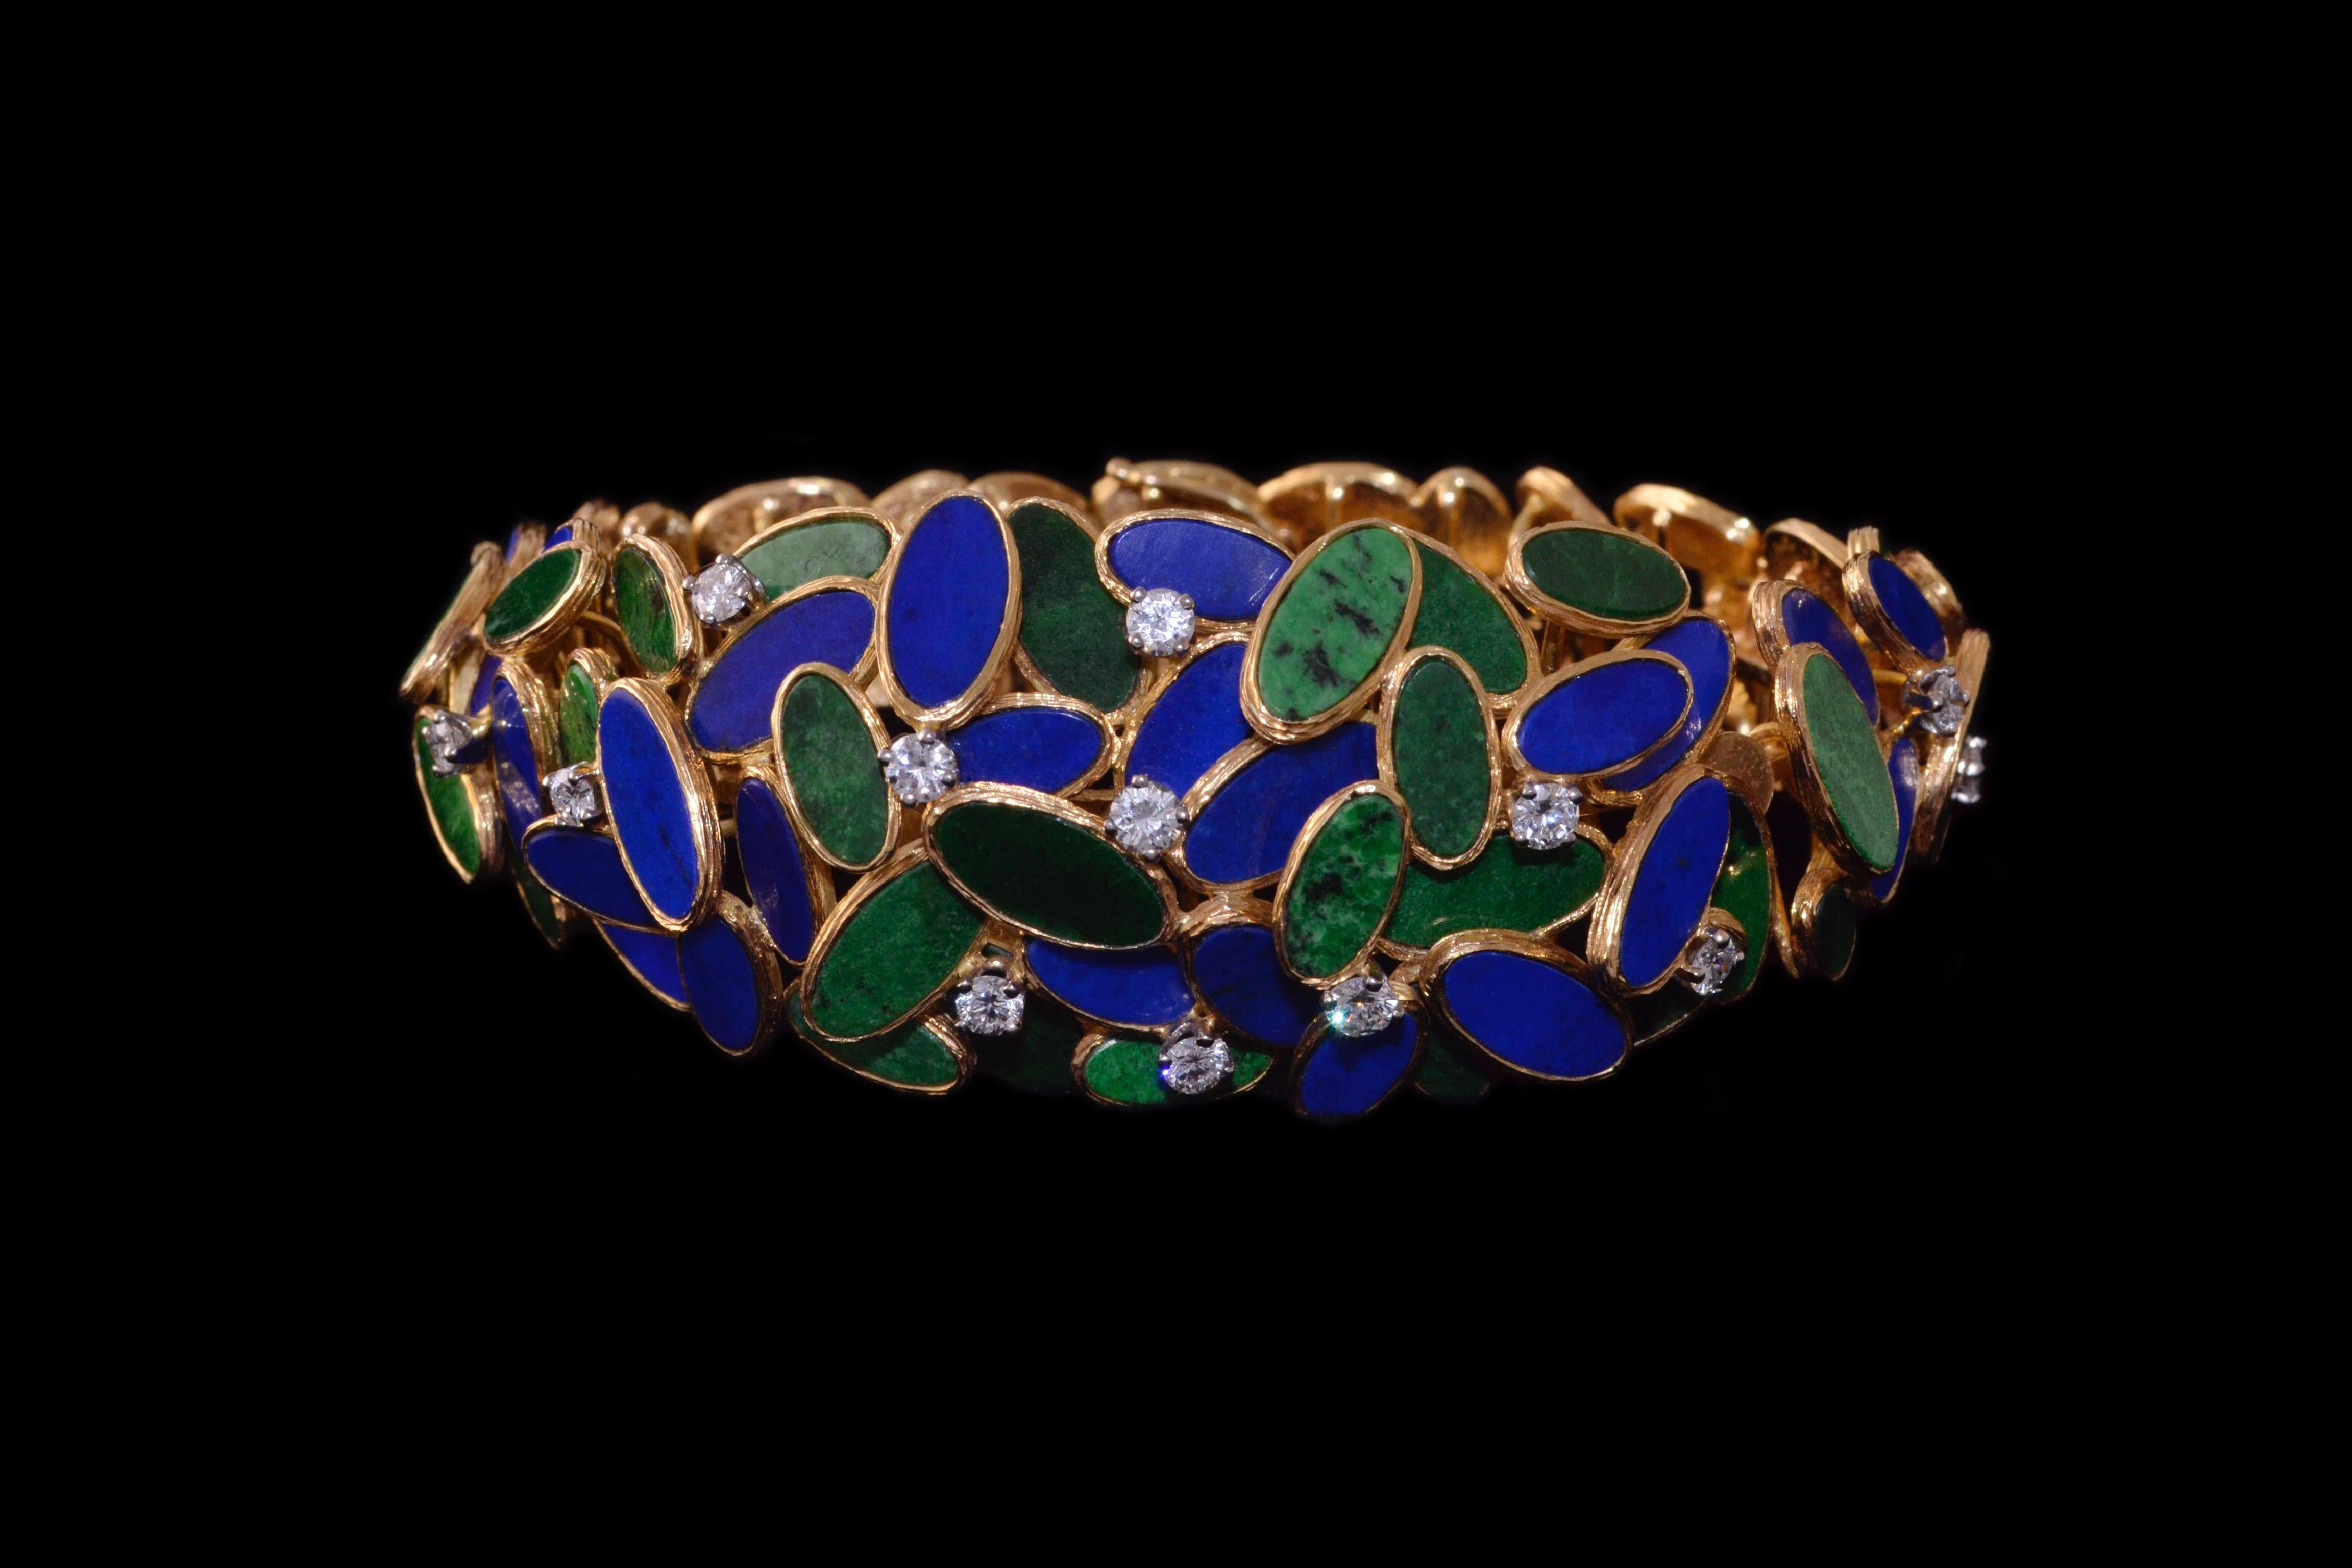 A flexible maw sit sit, lapis, diamond and 18 karat gold bracelet, by Augustin Julia-Plana, c.  1960.

This bracelet is stamped design Julia-Plana, 750, S, and measures approximately 7.4 inches long.

Julia-Plana's unique and highly regarded designs